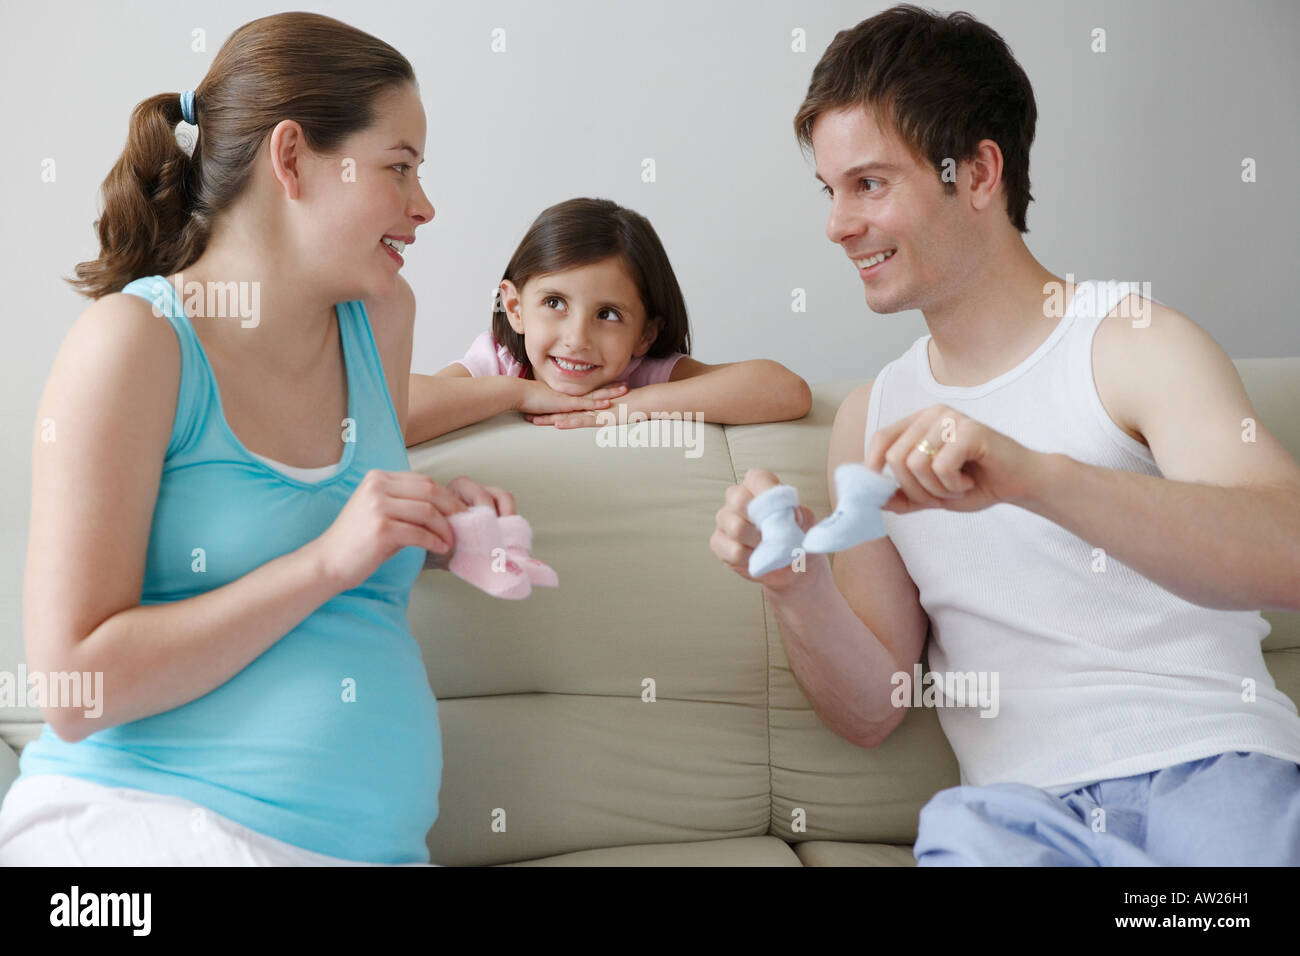 Family holding baby booties Banque D'Images